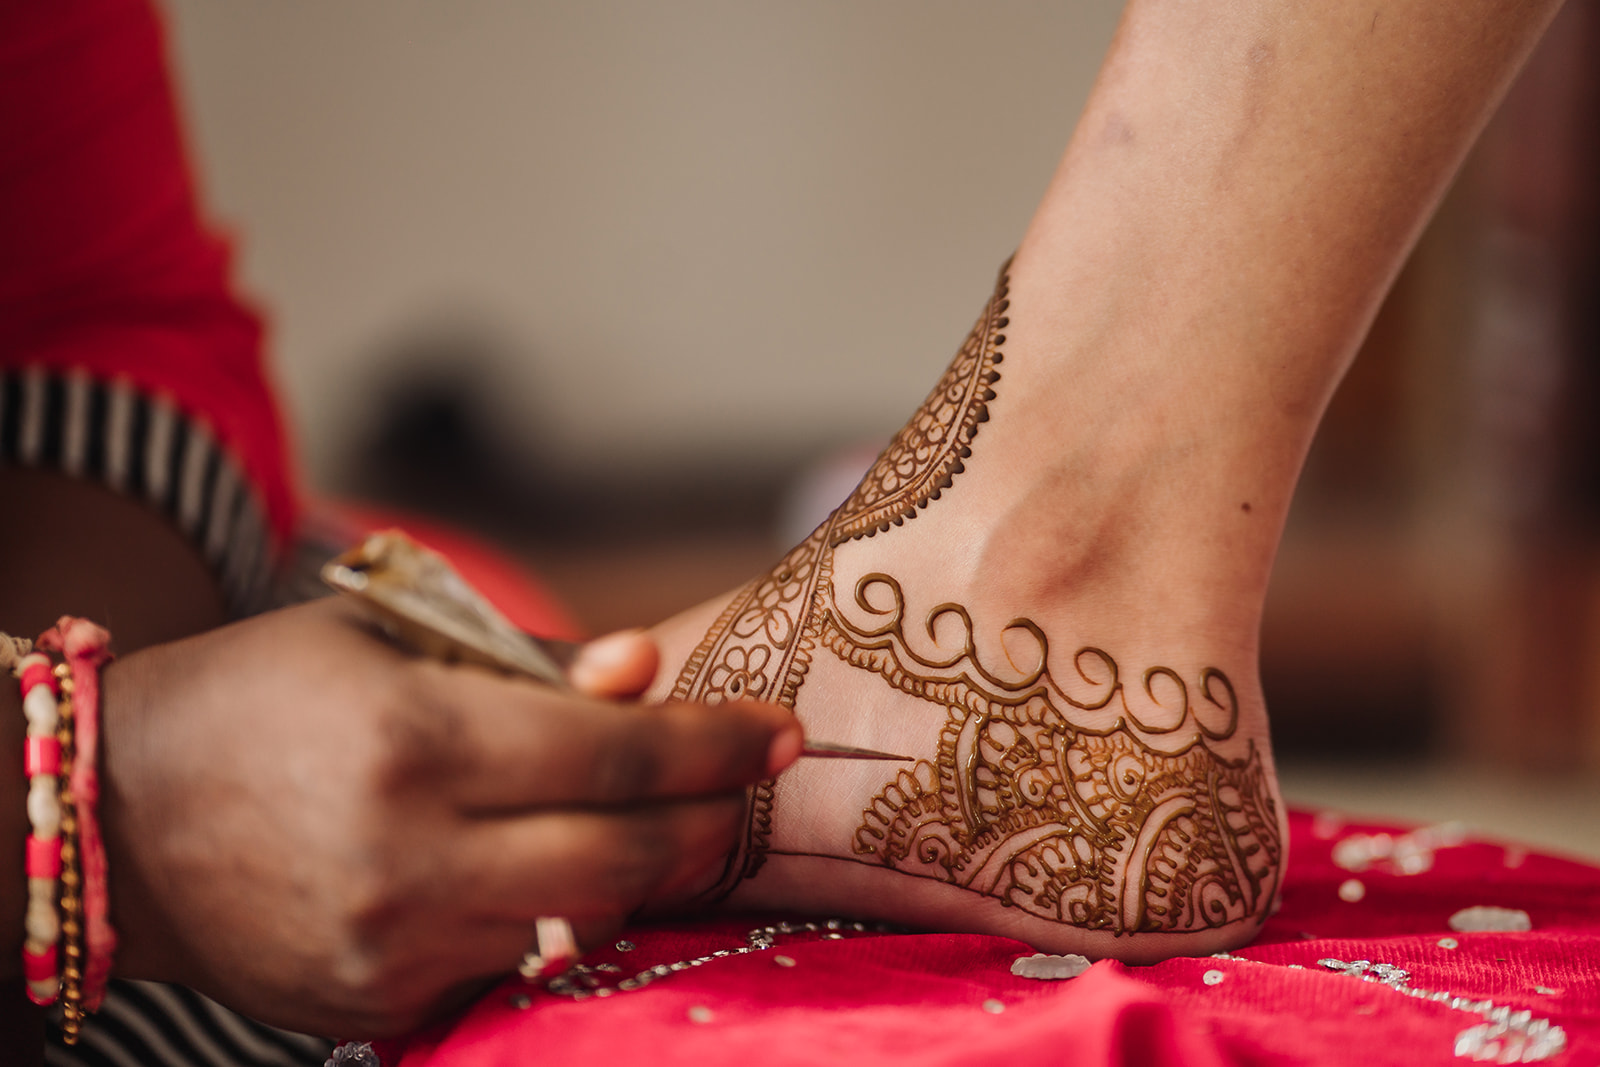 Mehendi magic: The bride experiences the beauty of mehendi application in this captivating image